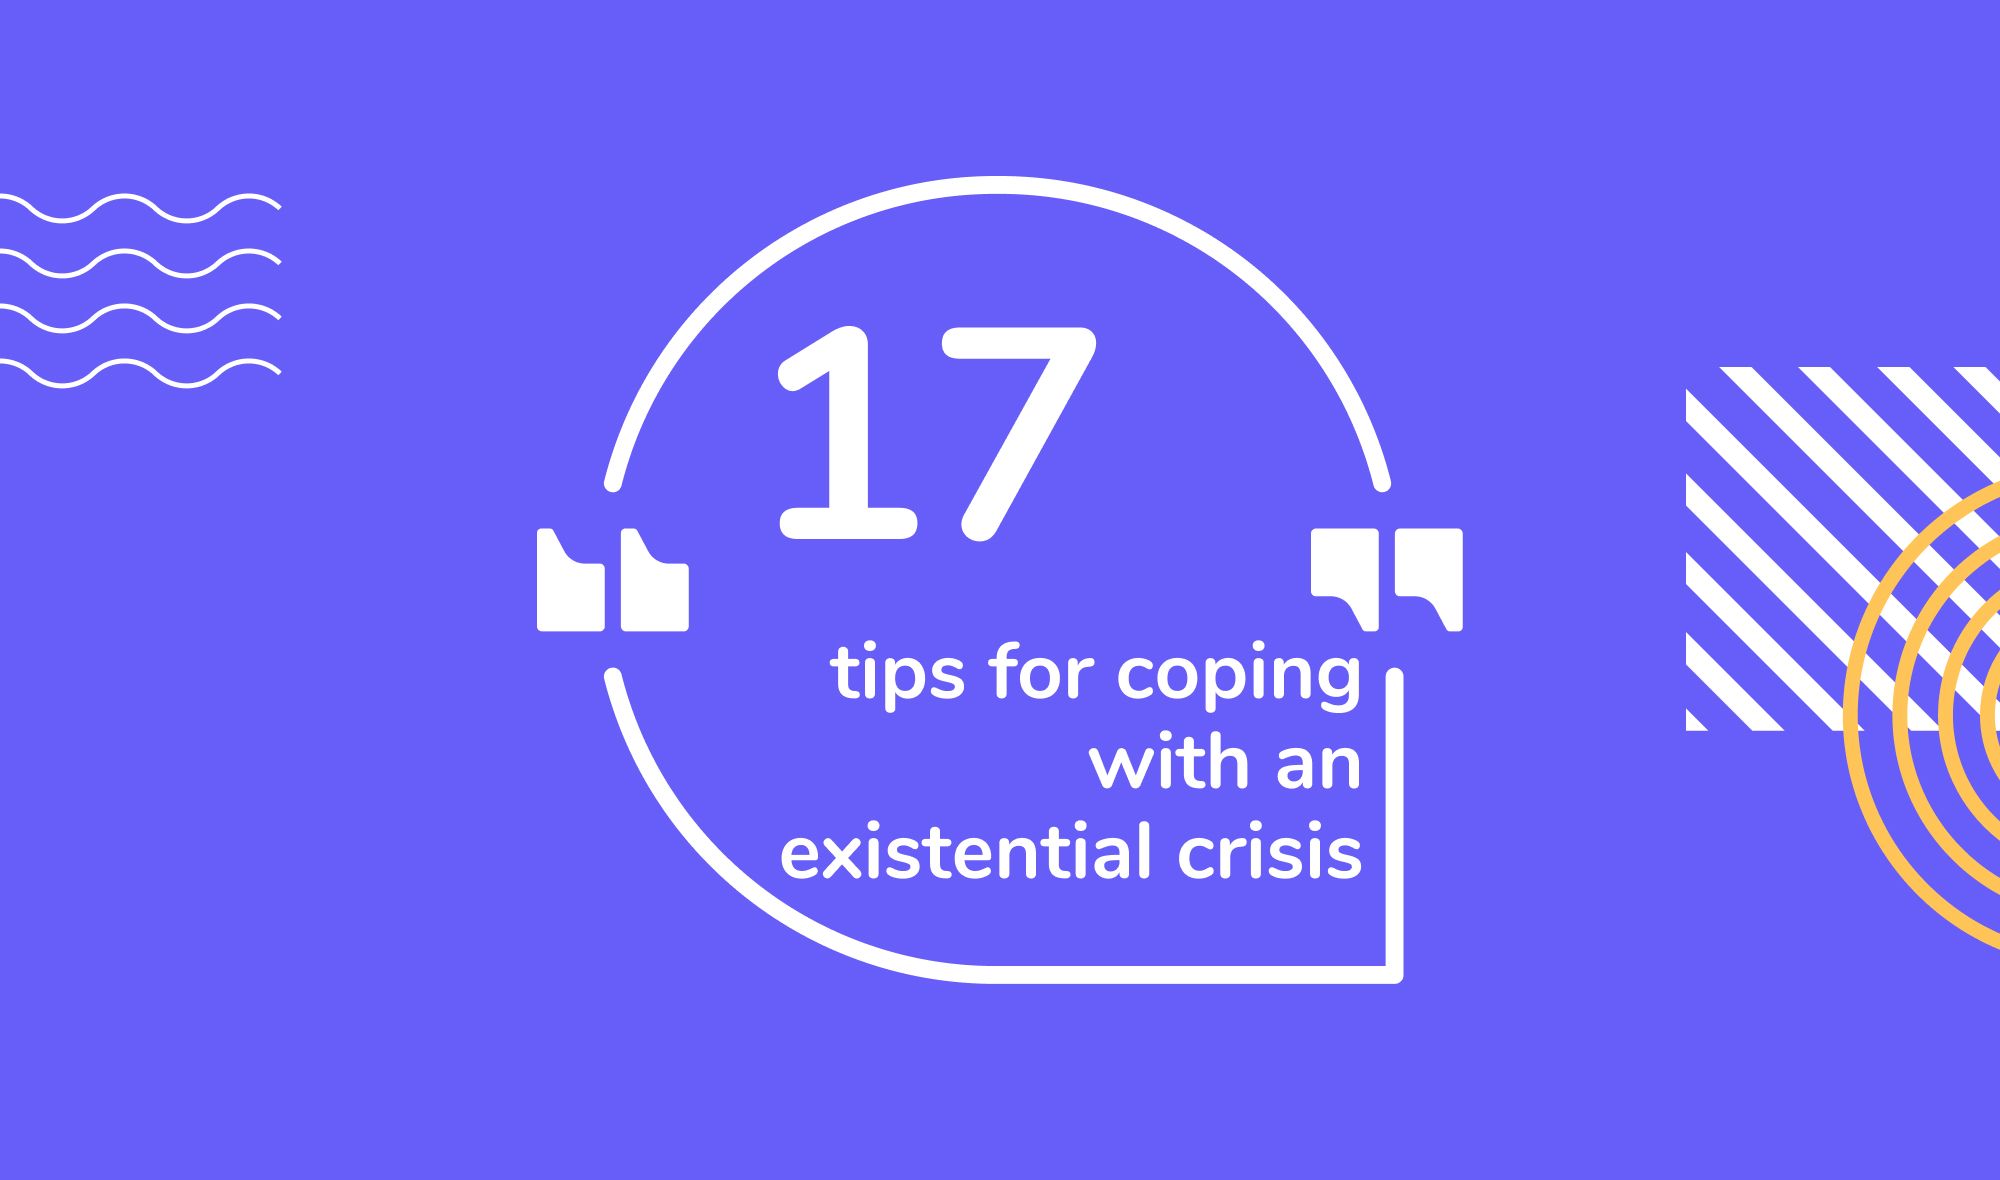 17 tips for coping with an existential crisis